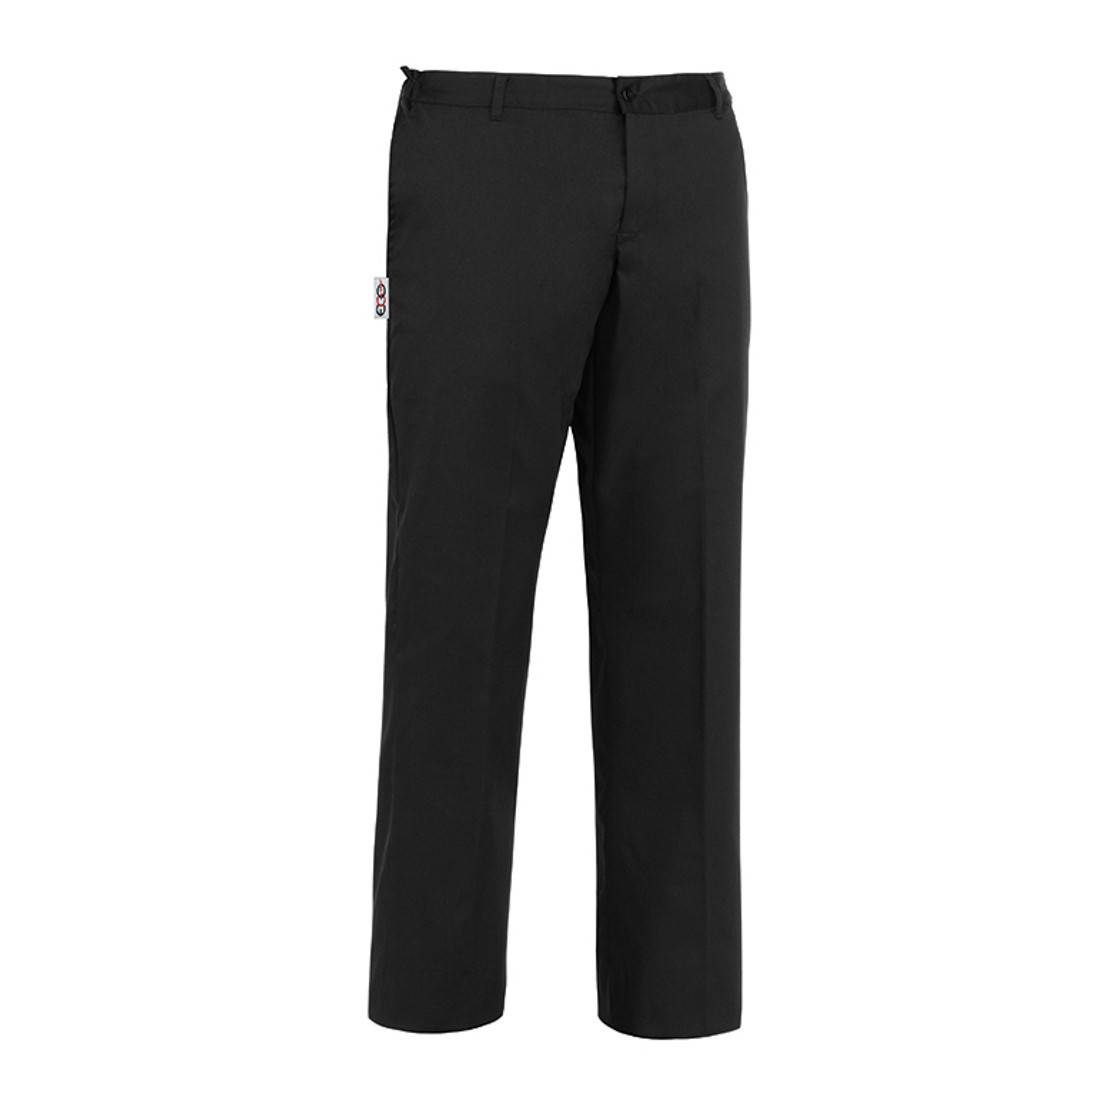 Evo Trousers, 65% poliester/35% bumbac - Safetywear